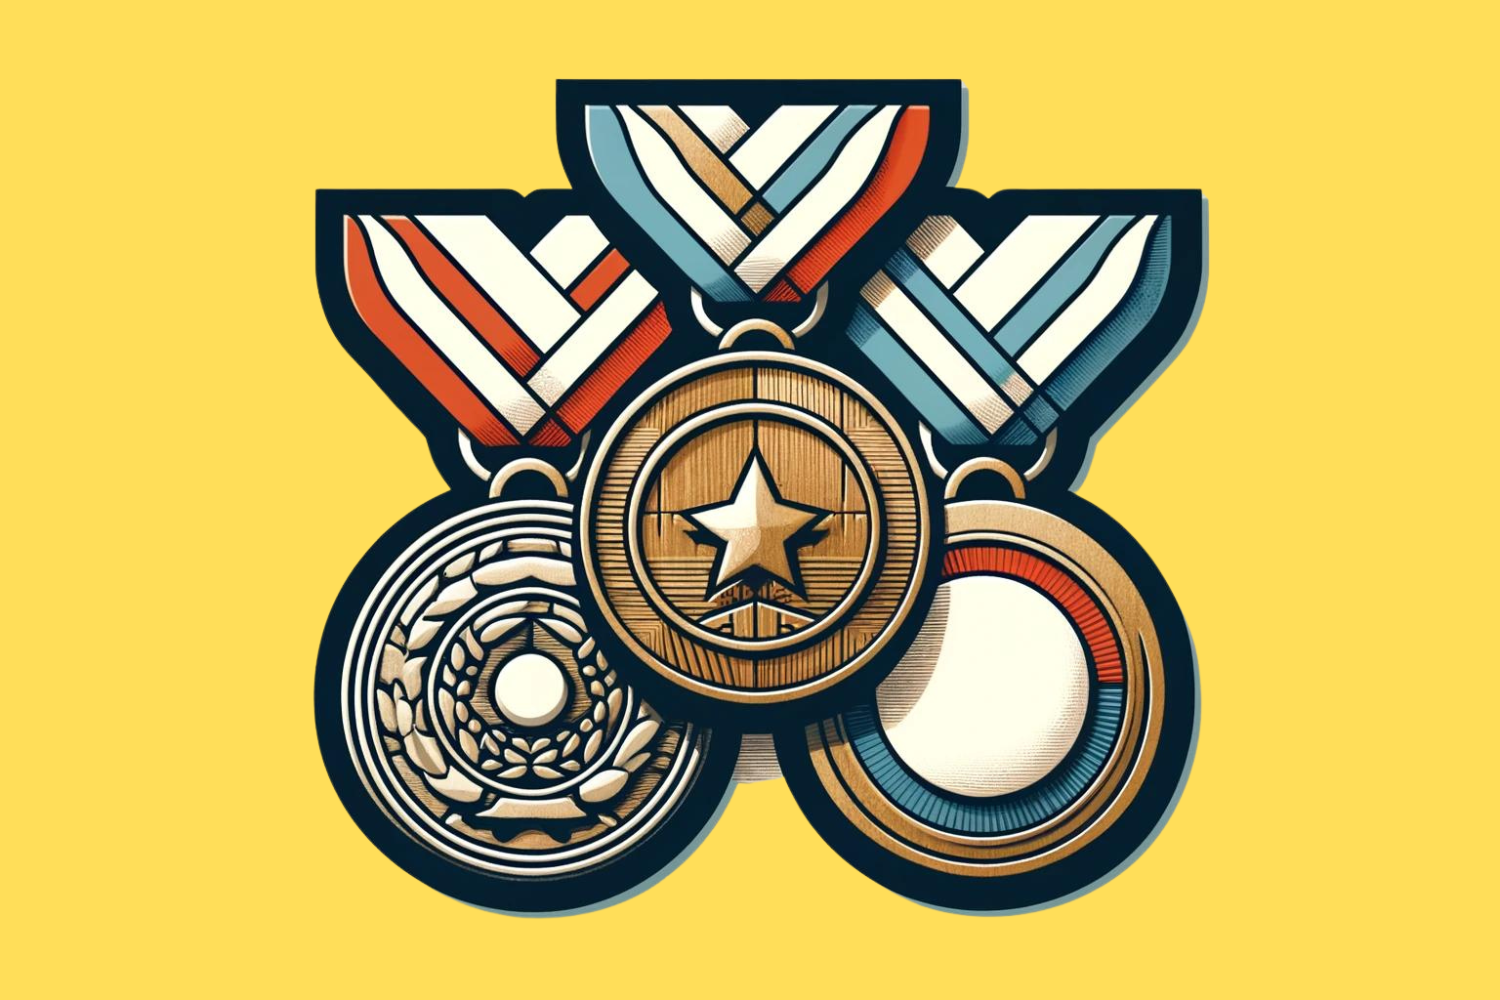 Which Medal Type Is Best? Metal Medals Vs Wooden Medals Vs Insert Medals